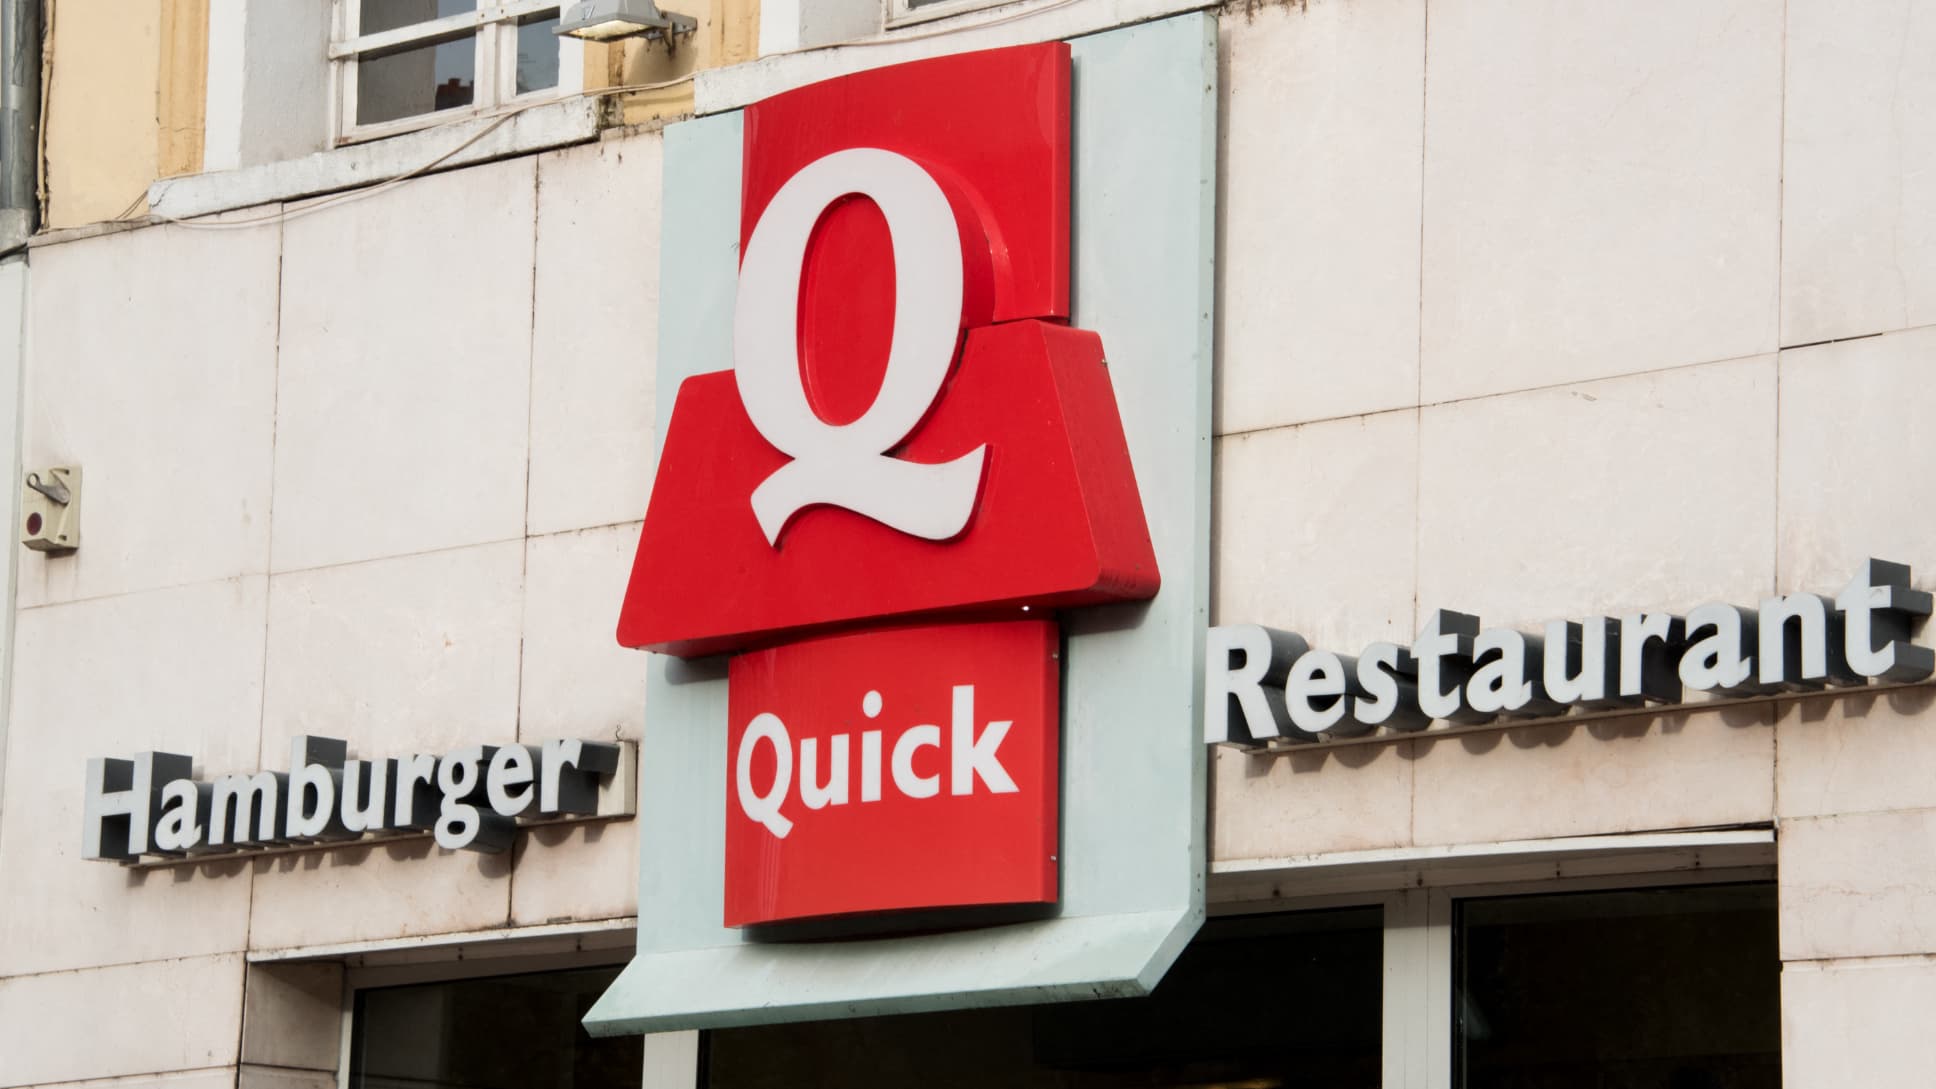 Menus, advertisements, restaurants… how Quick wants to become a fast food giant again